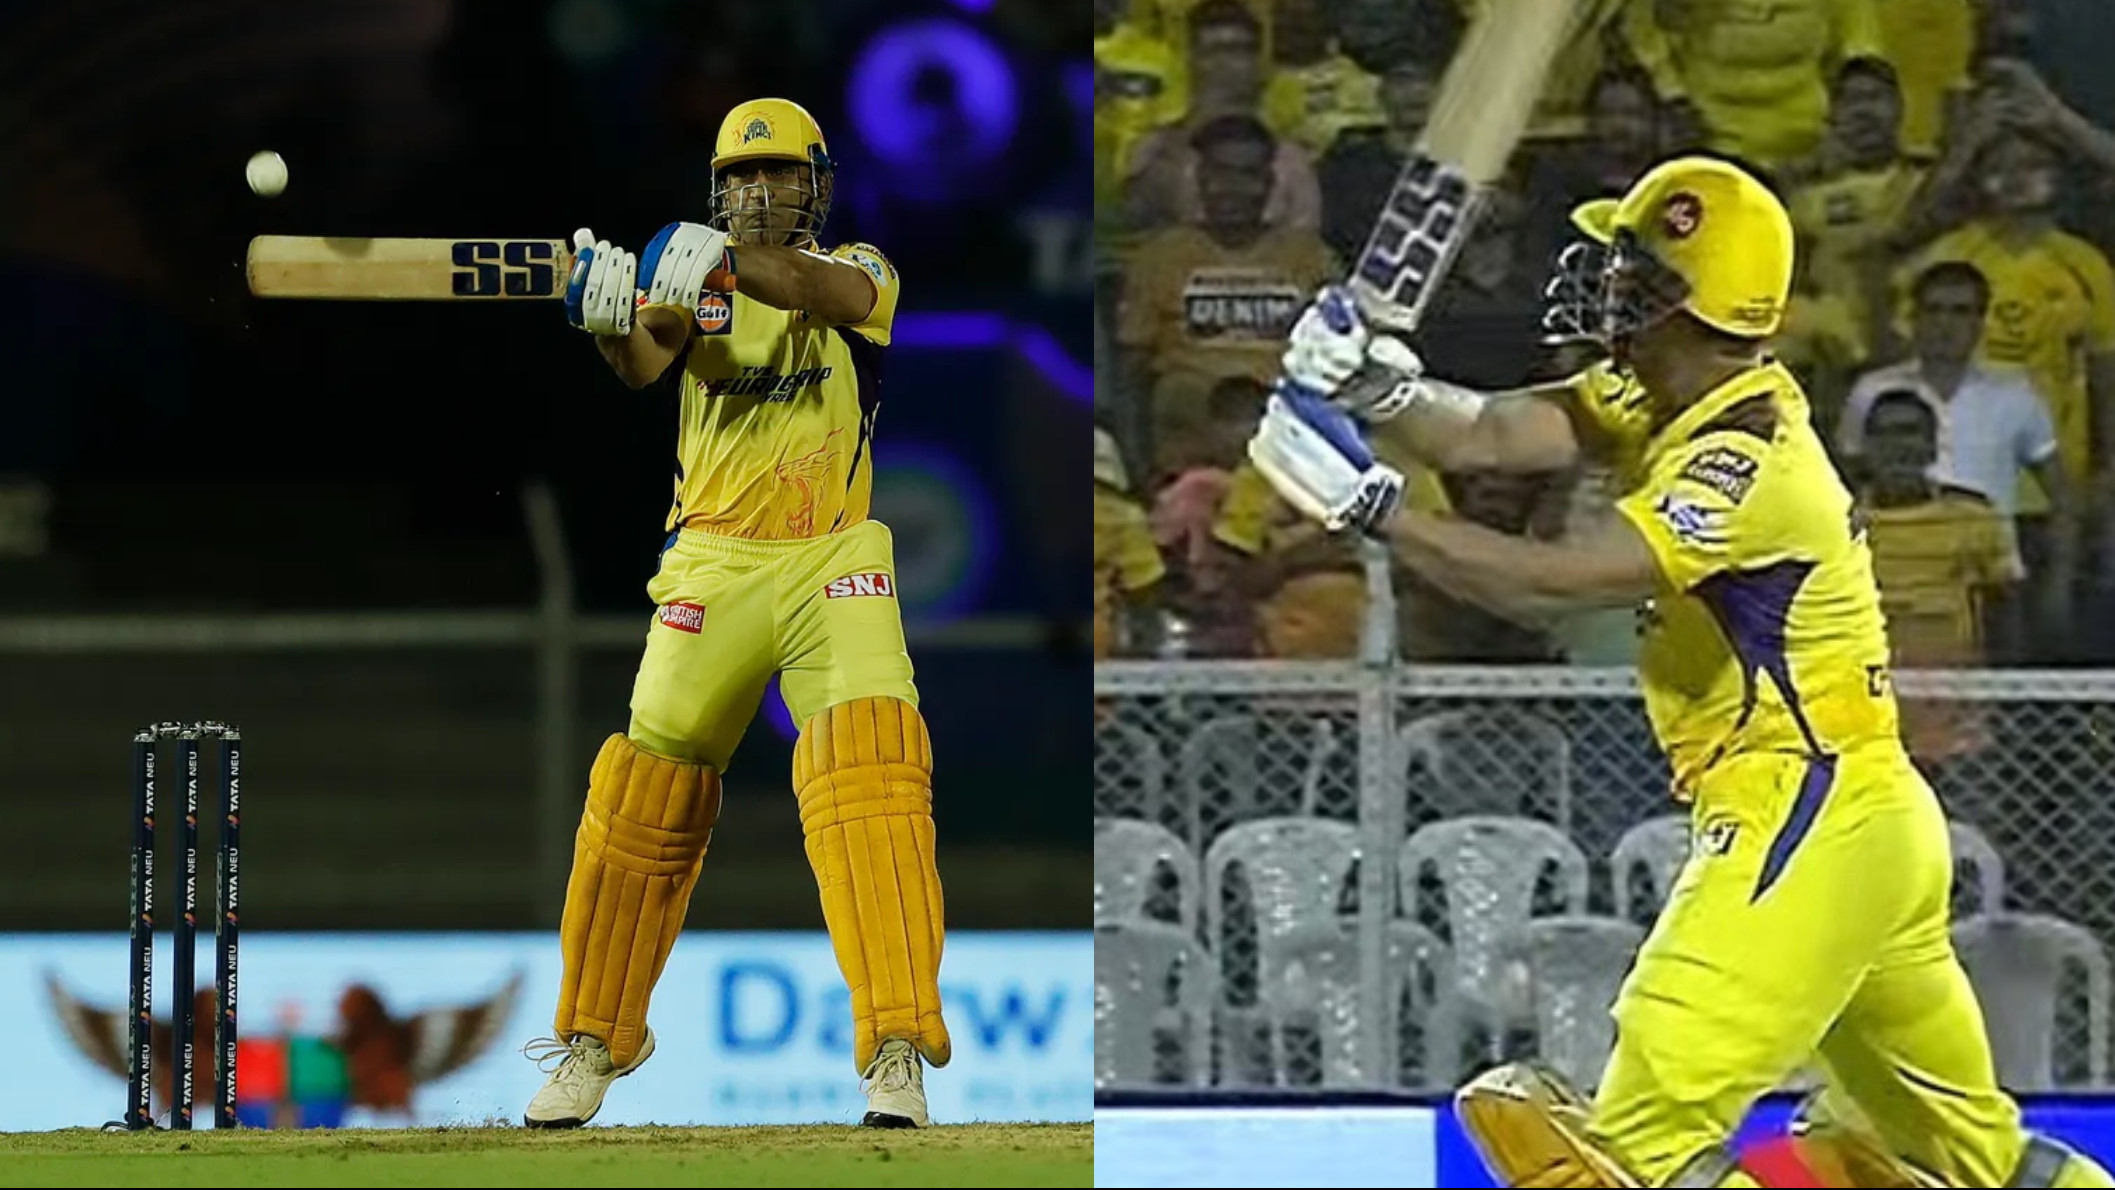 IPL 2022: WATCH- MS Dhoni slams a six first ball against LSG; completes 7000 runs during his knock